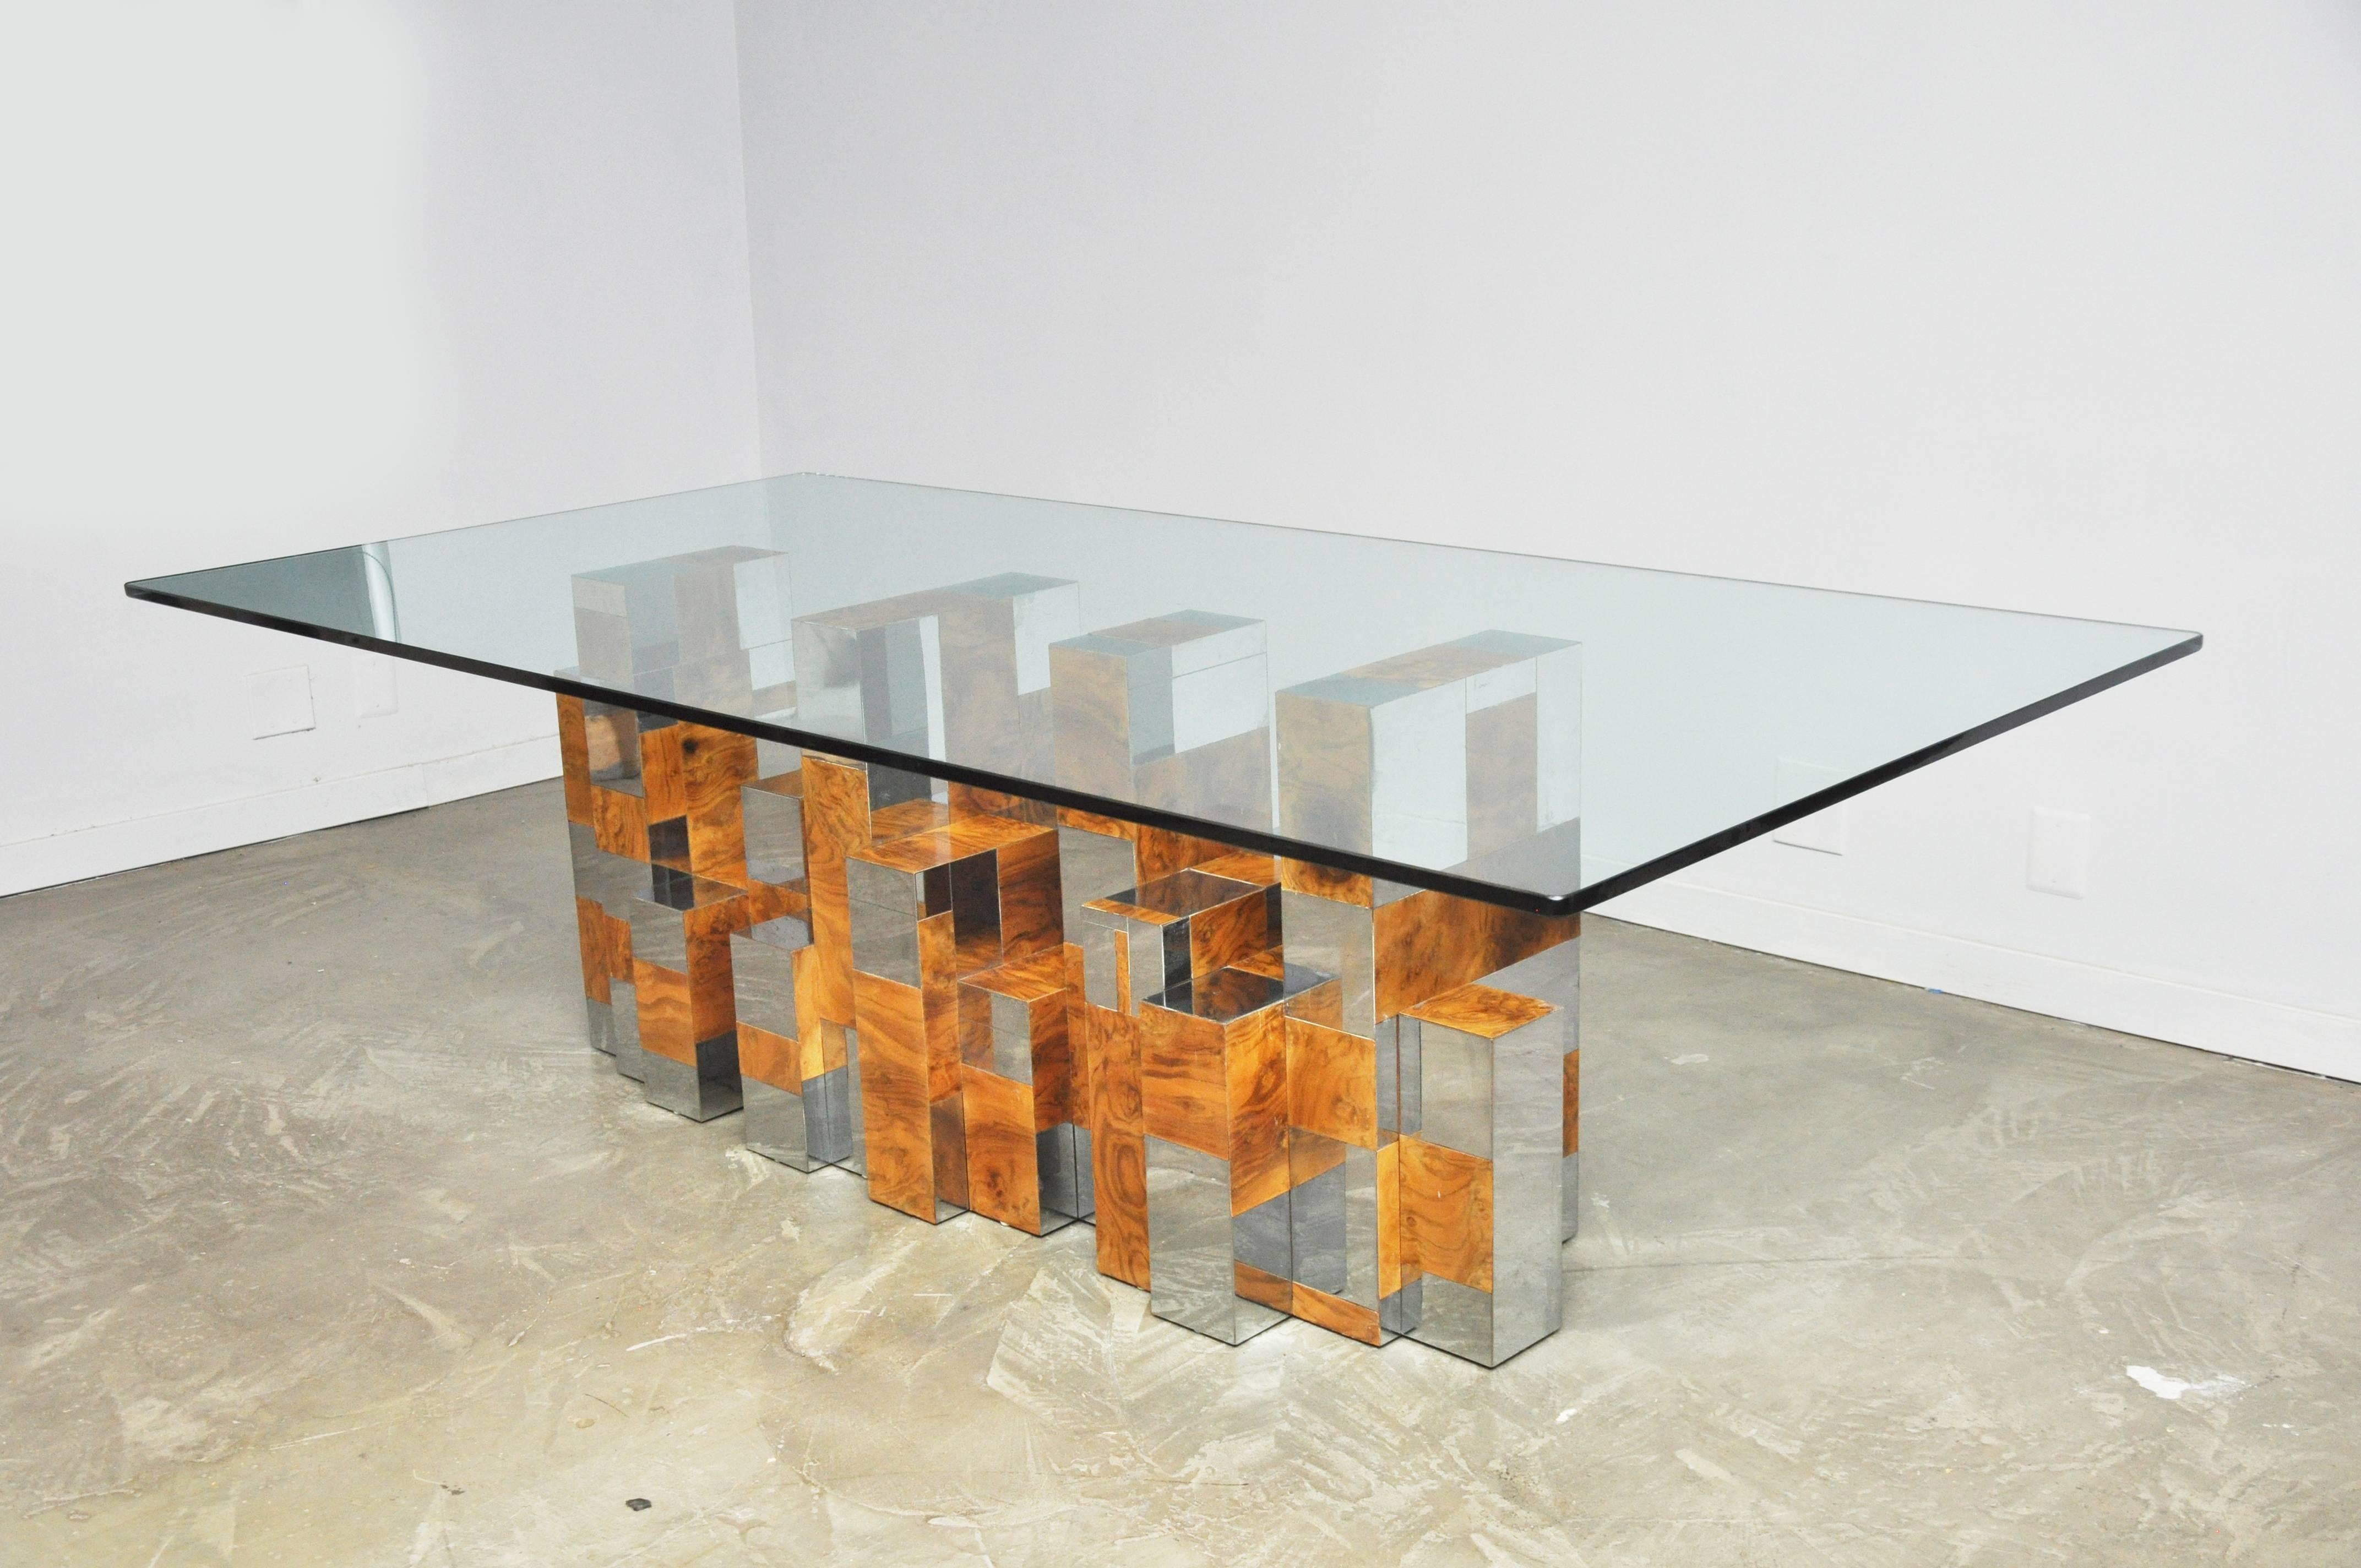 Burl wood and chrome patchwork dining table. Designed by Paul Evans for Directional, circa 1960s. With new glass, this can also be used a console table.

Measures: Glass top 96 x 48.
Base 65 long x 19 deep x 28 tall.

Matching sideboard